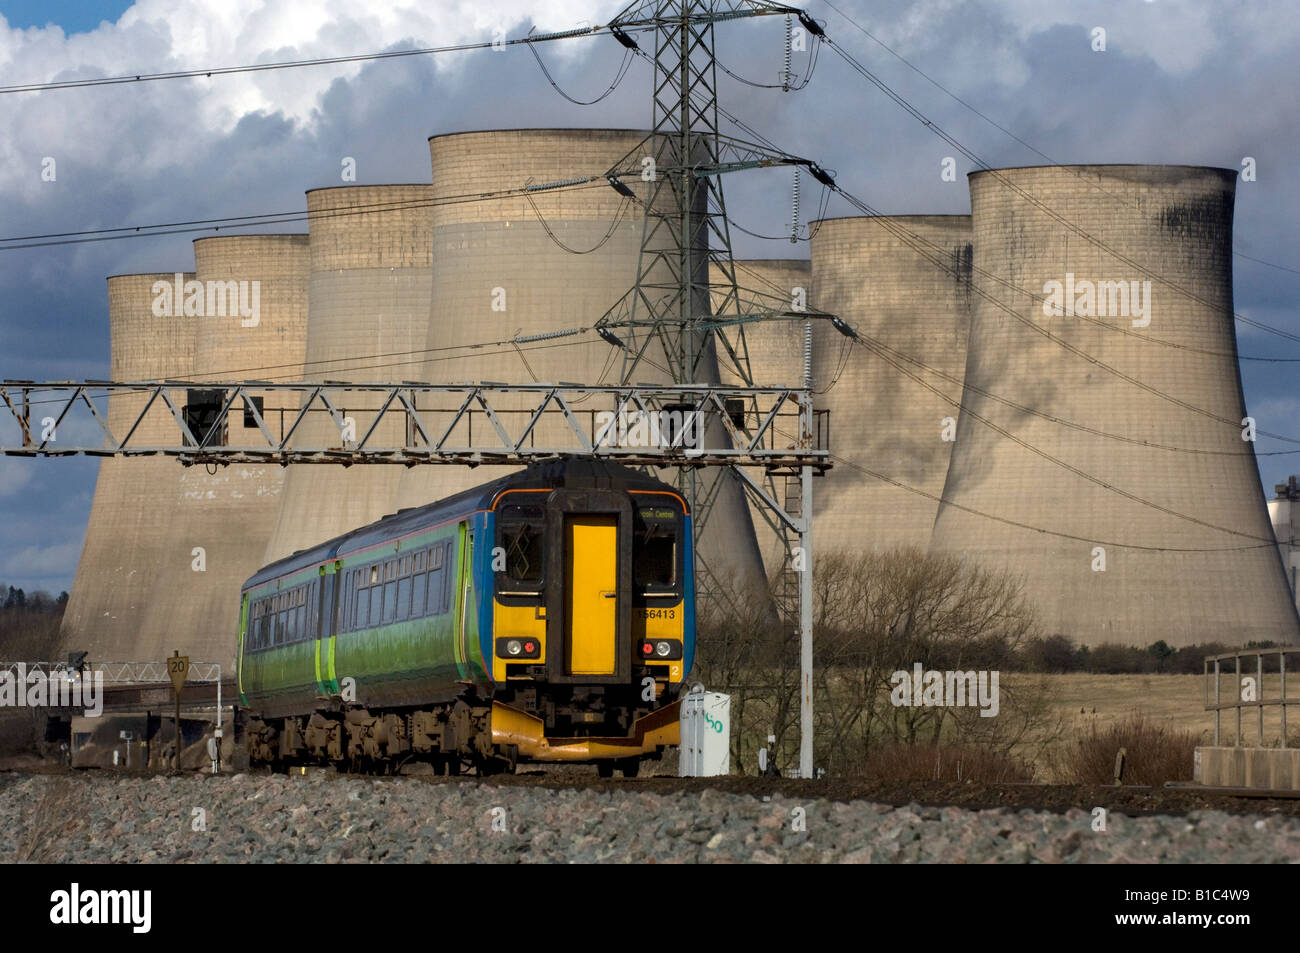 An East Midlands Trains Midland Mainline Class 156 two coach suburban train passes E.ON power station cooling towers and pylons Stock Photo